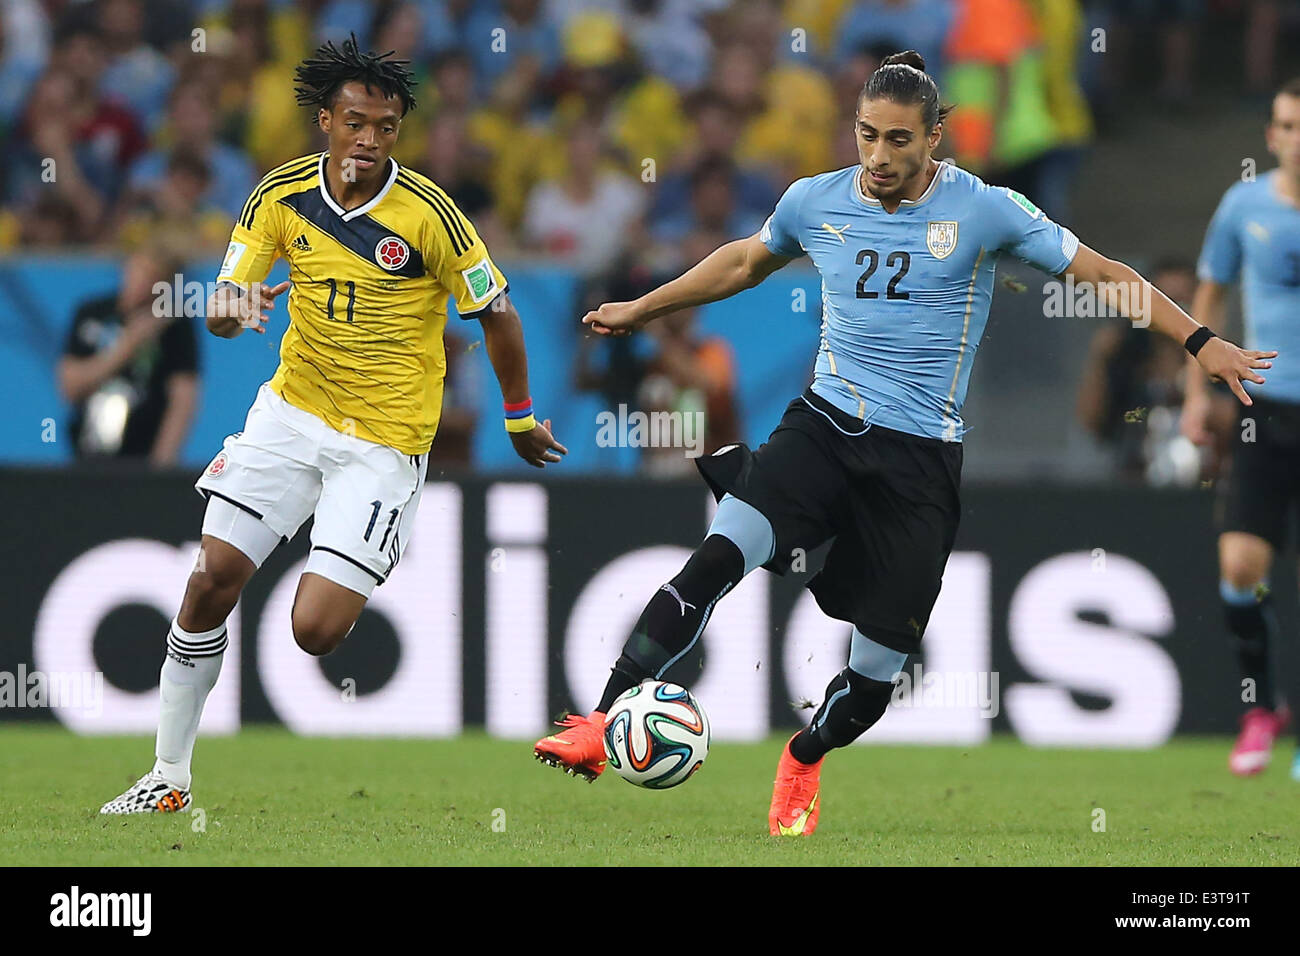 Rio De Janeiro, Brazil. 28th June, 2014. Uruguay's Martin Caceres controls the ball during a Round of 16 match between Colombia and Uruguay of 2014 FIFA World Cup at the Estadio do Maracana Stadium in Rio de Janeiro, Brazil, on June 28, 2014. Colombia won 2-0 over Uruguay on Saturday. Credit:  Wang Yuguo/Xinhua/Alamy Live News Stock Photo